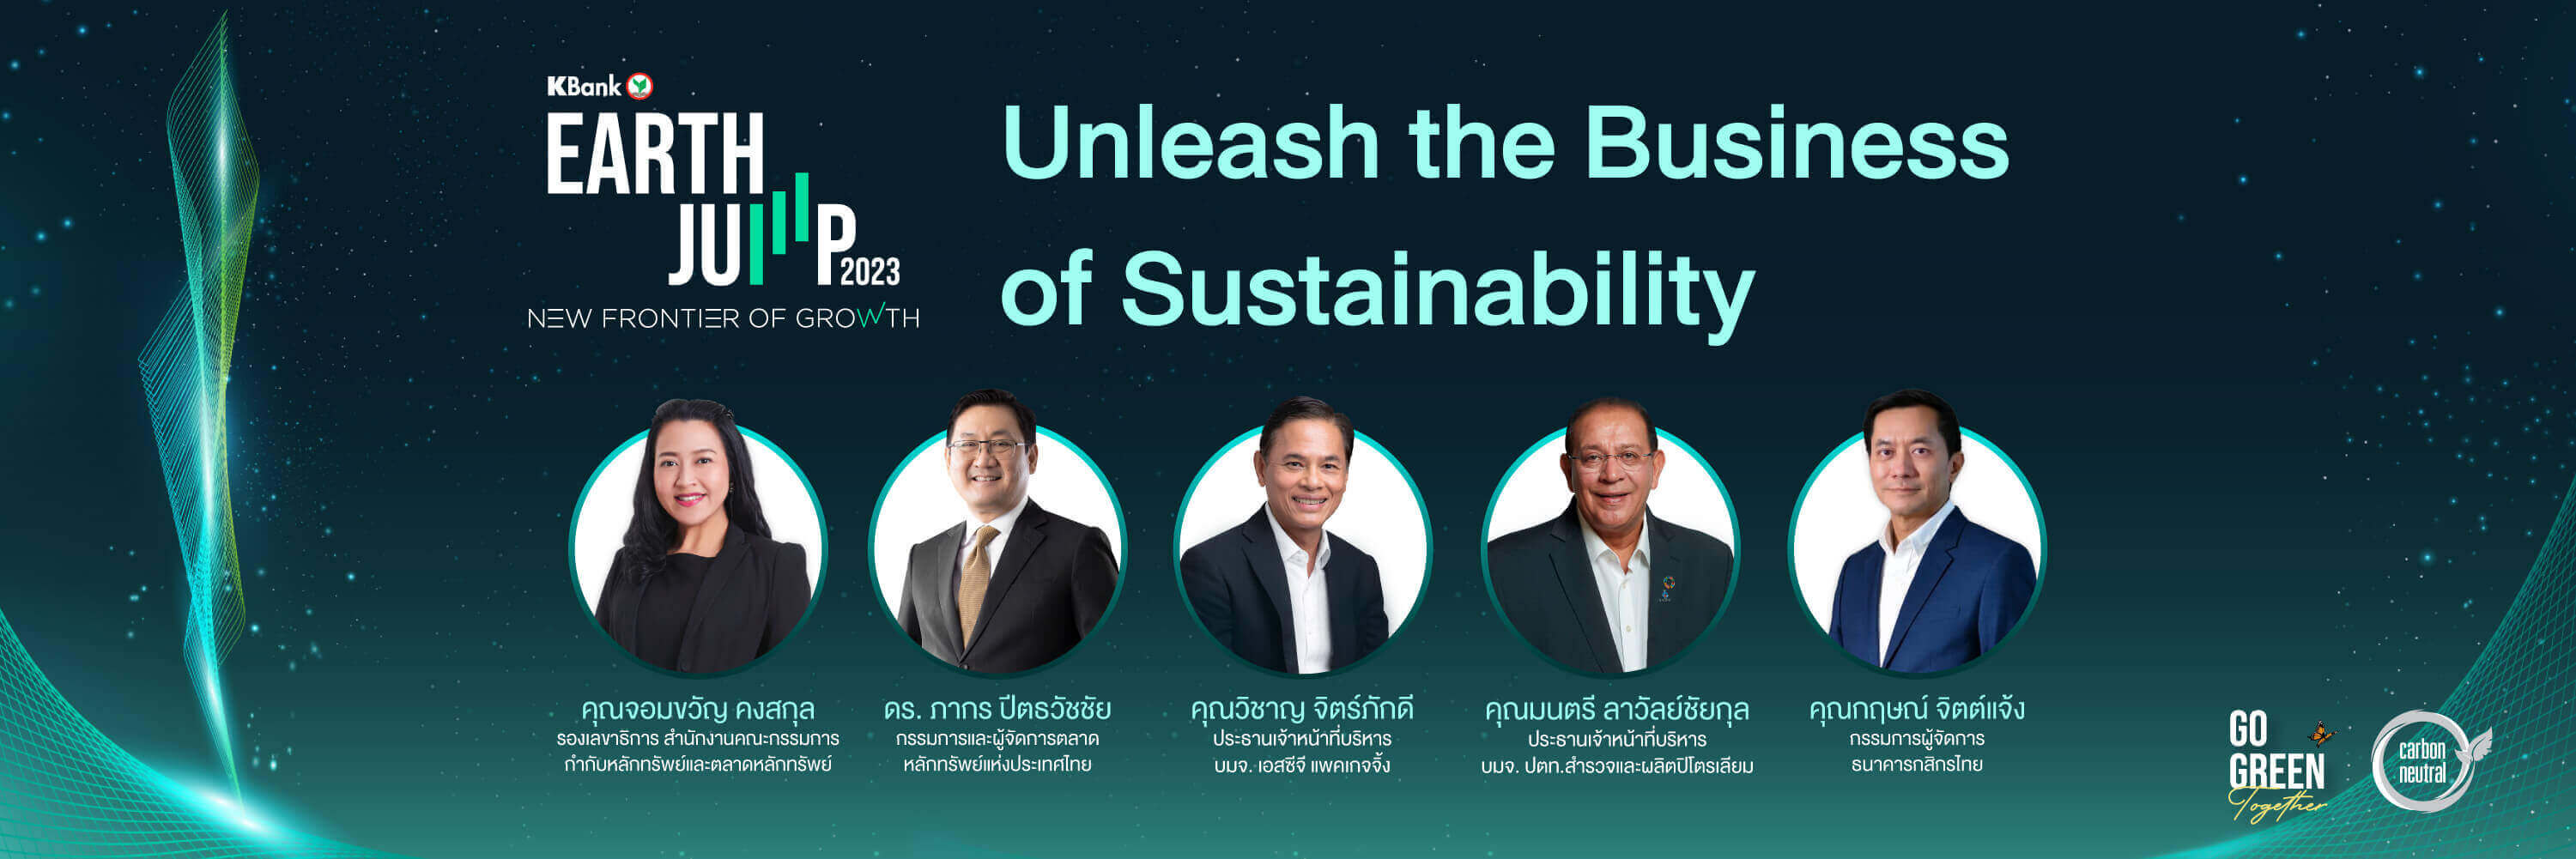 EARTH JUMP 2023, Unleash the Business of Sustainability